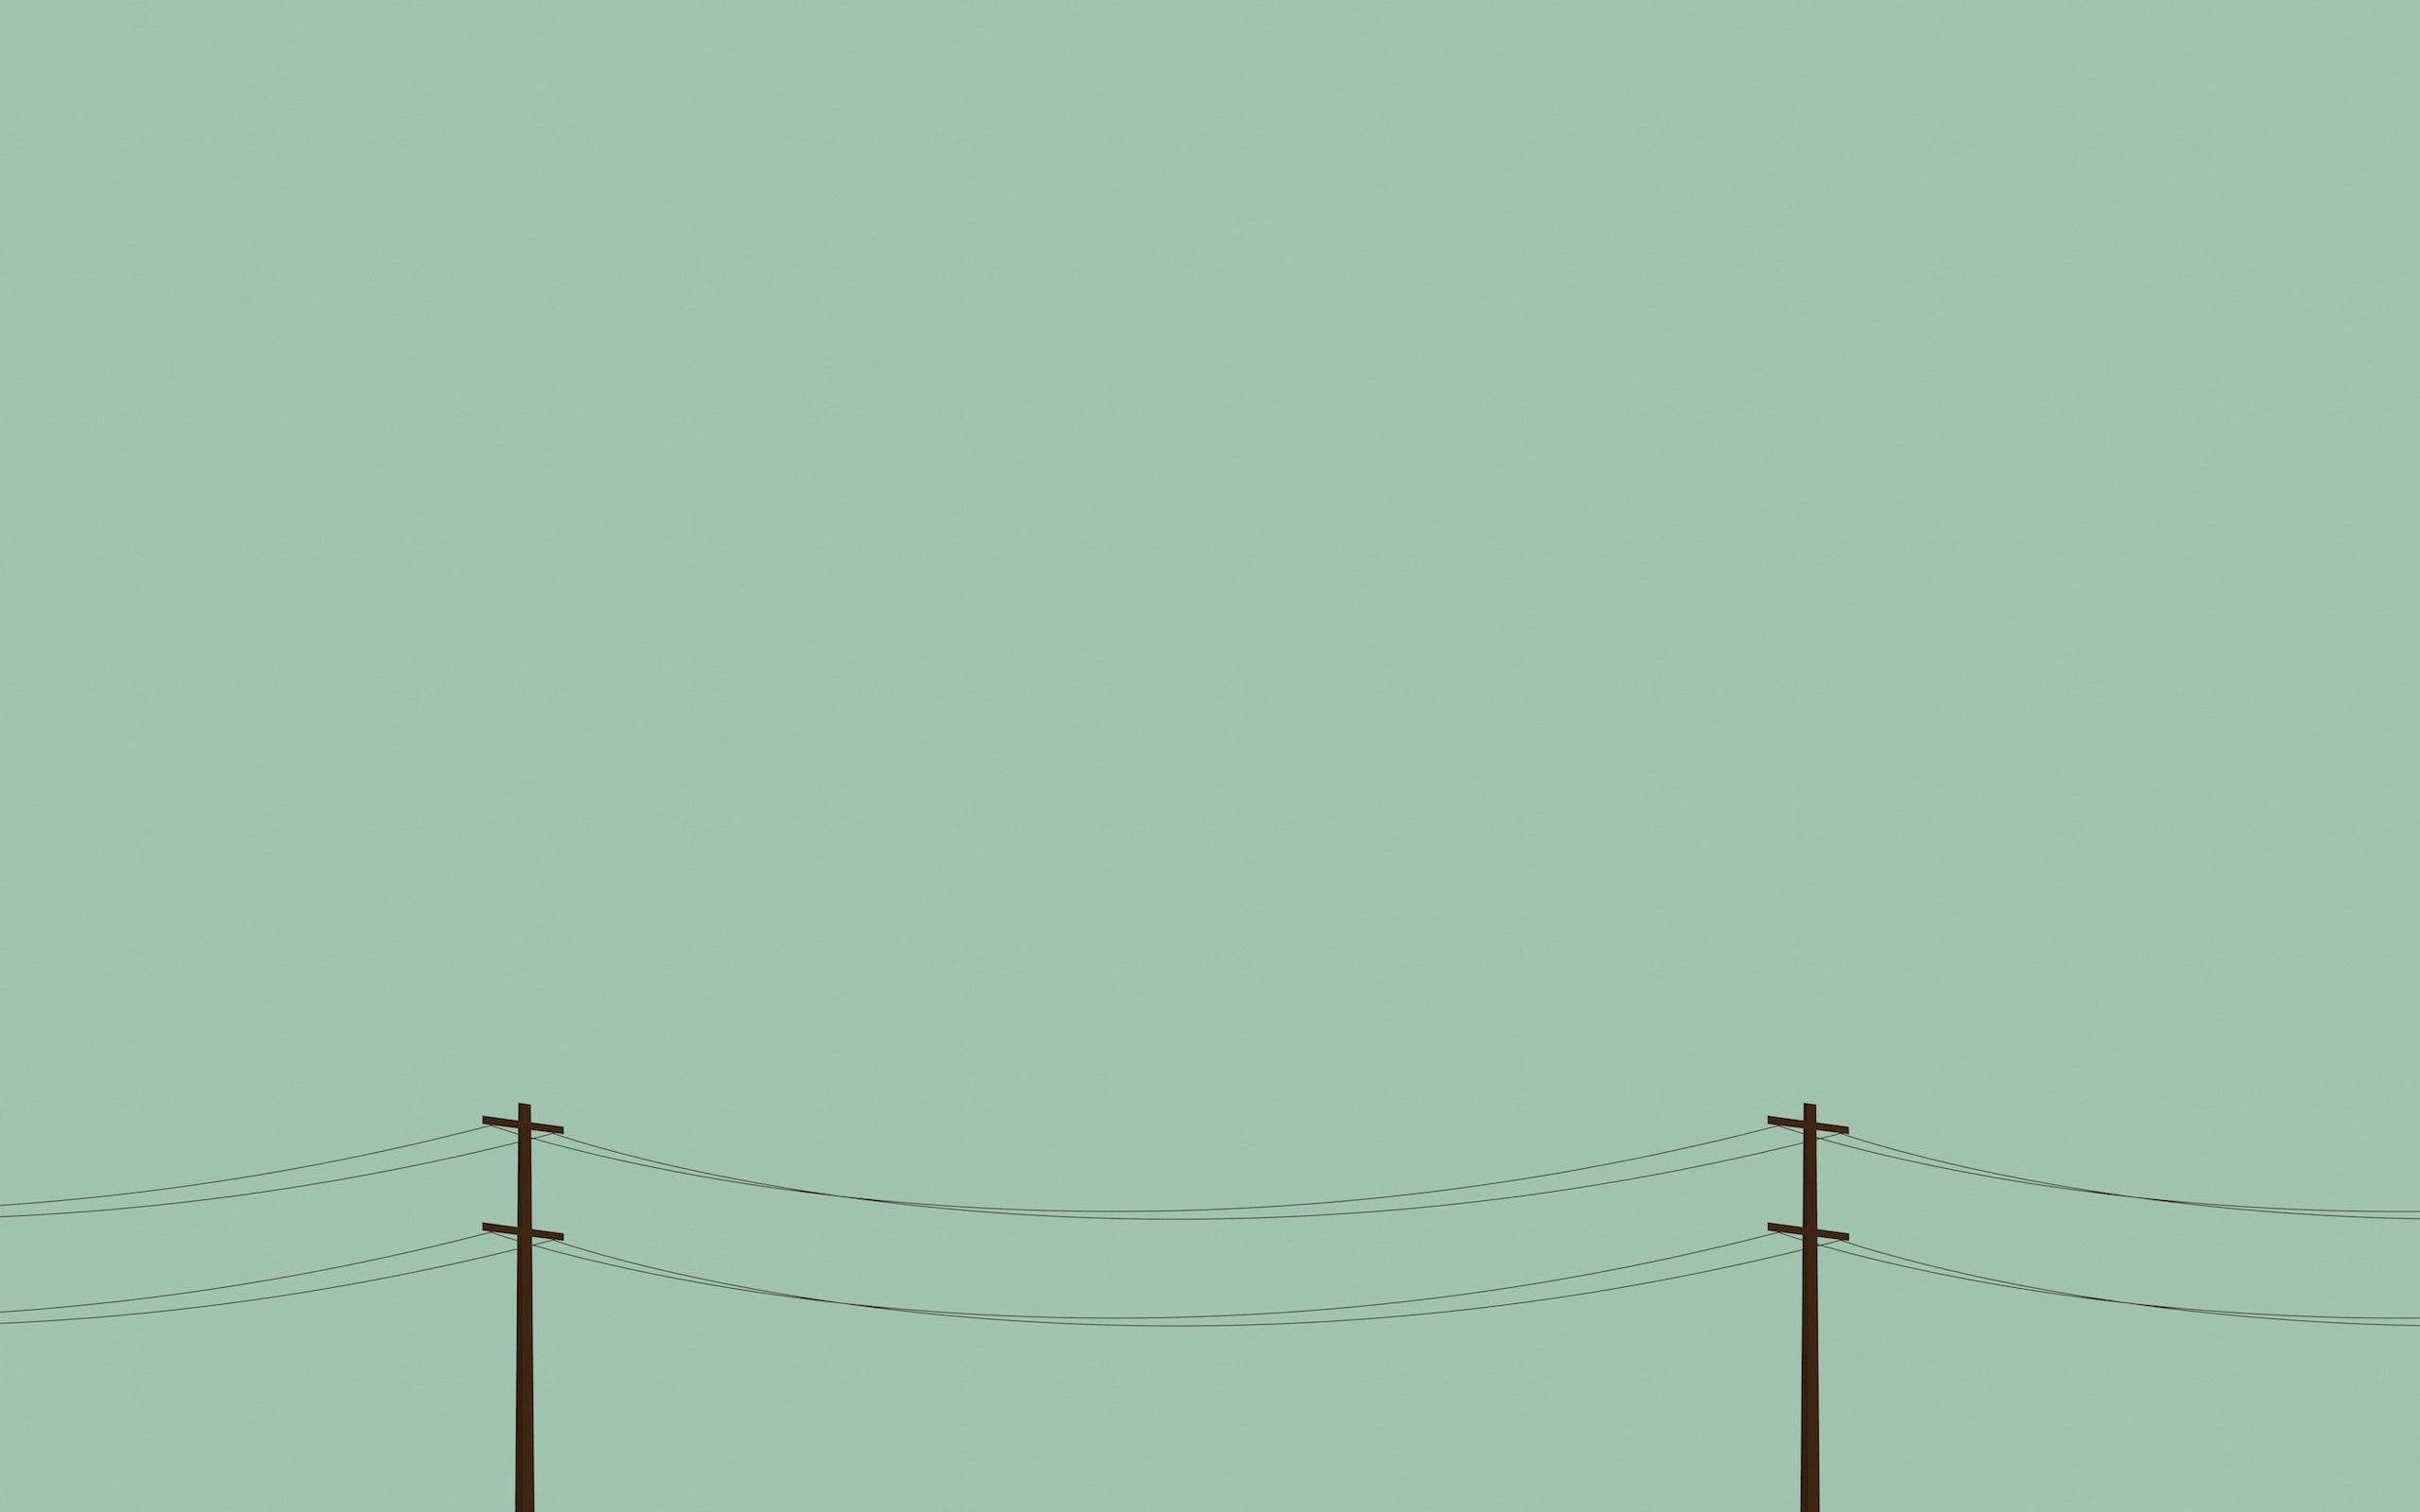 Two telephone poles on a green background - 2560x1600